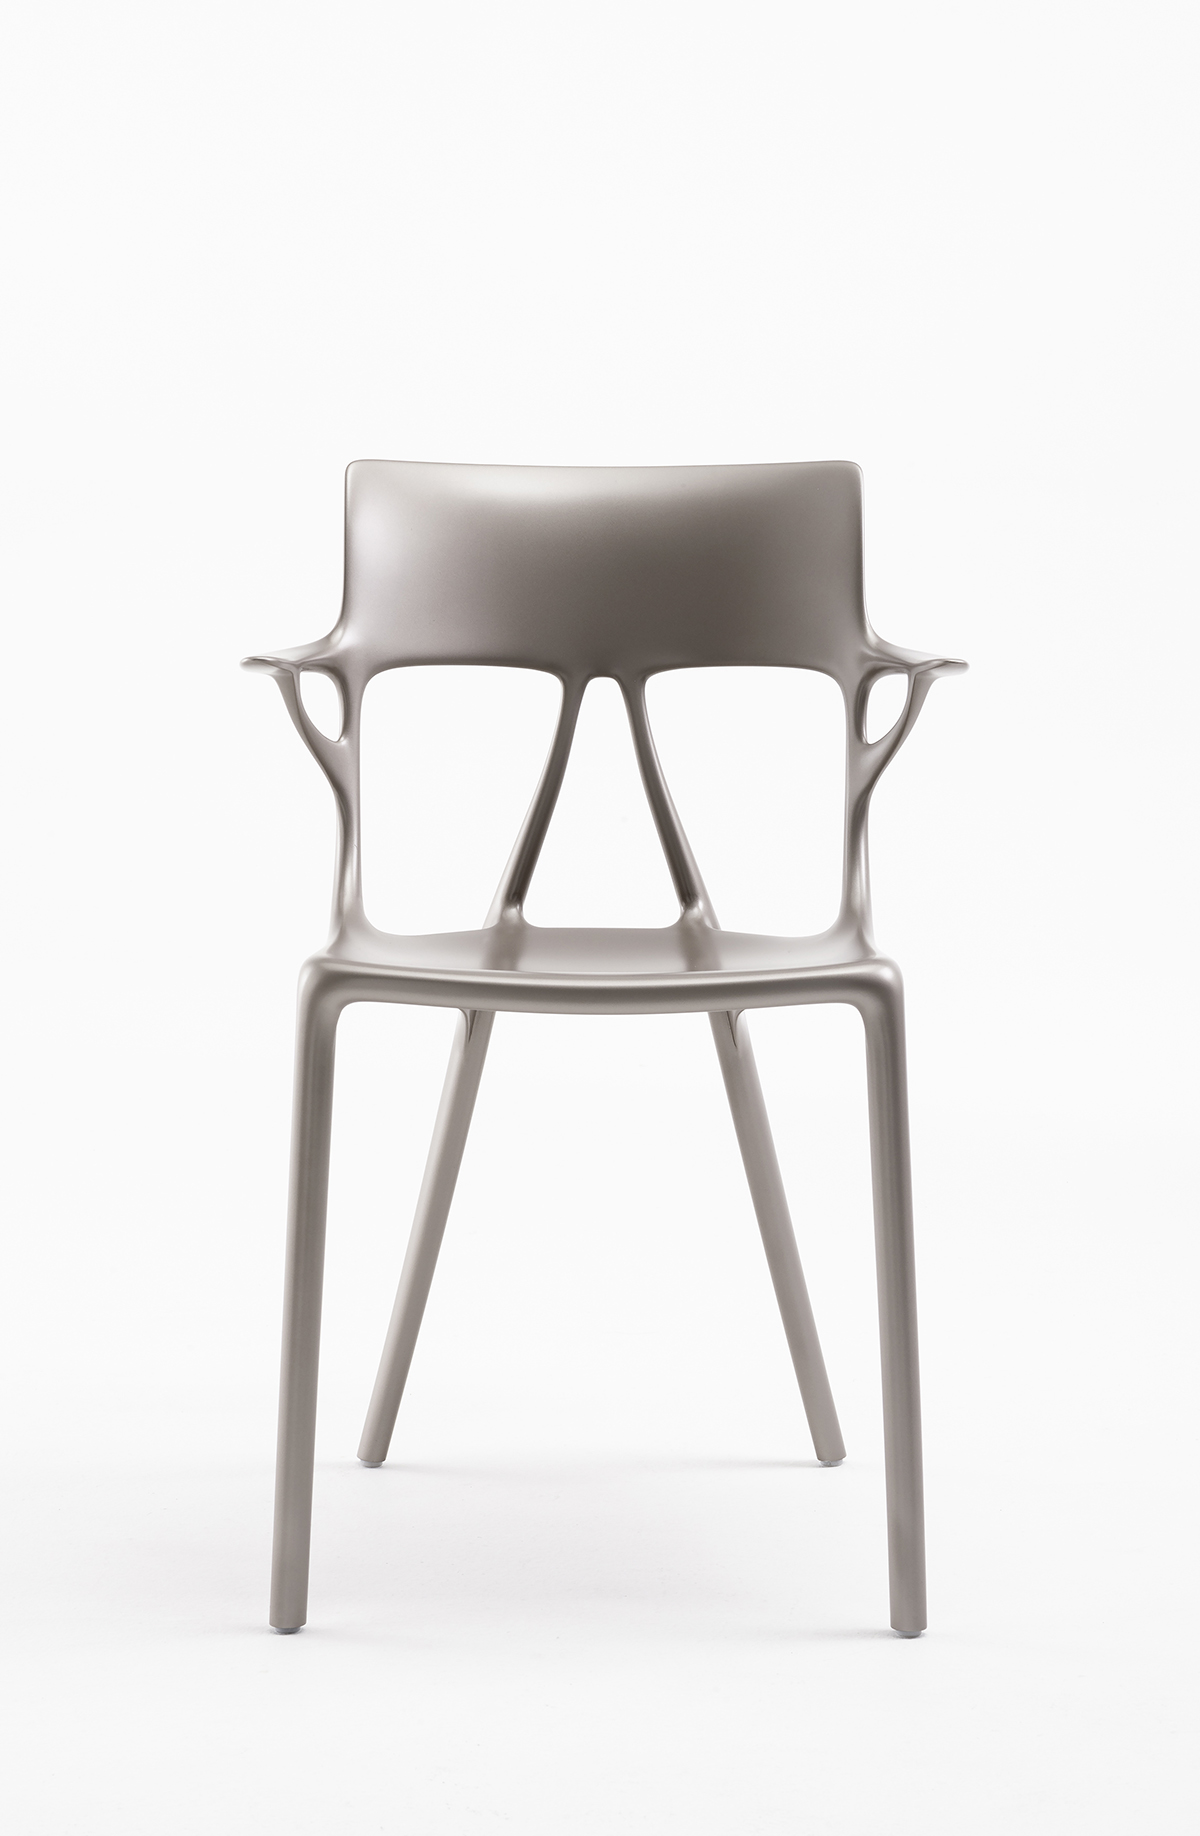 Contemporary plastic chair against white background